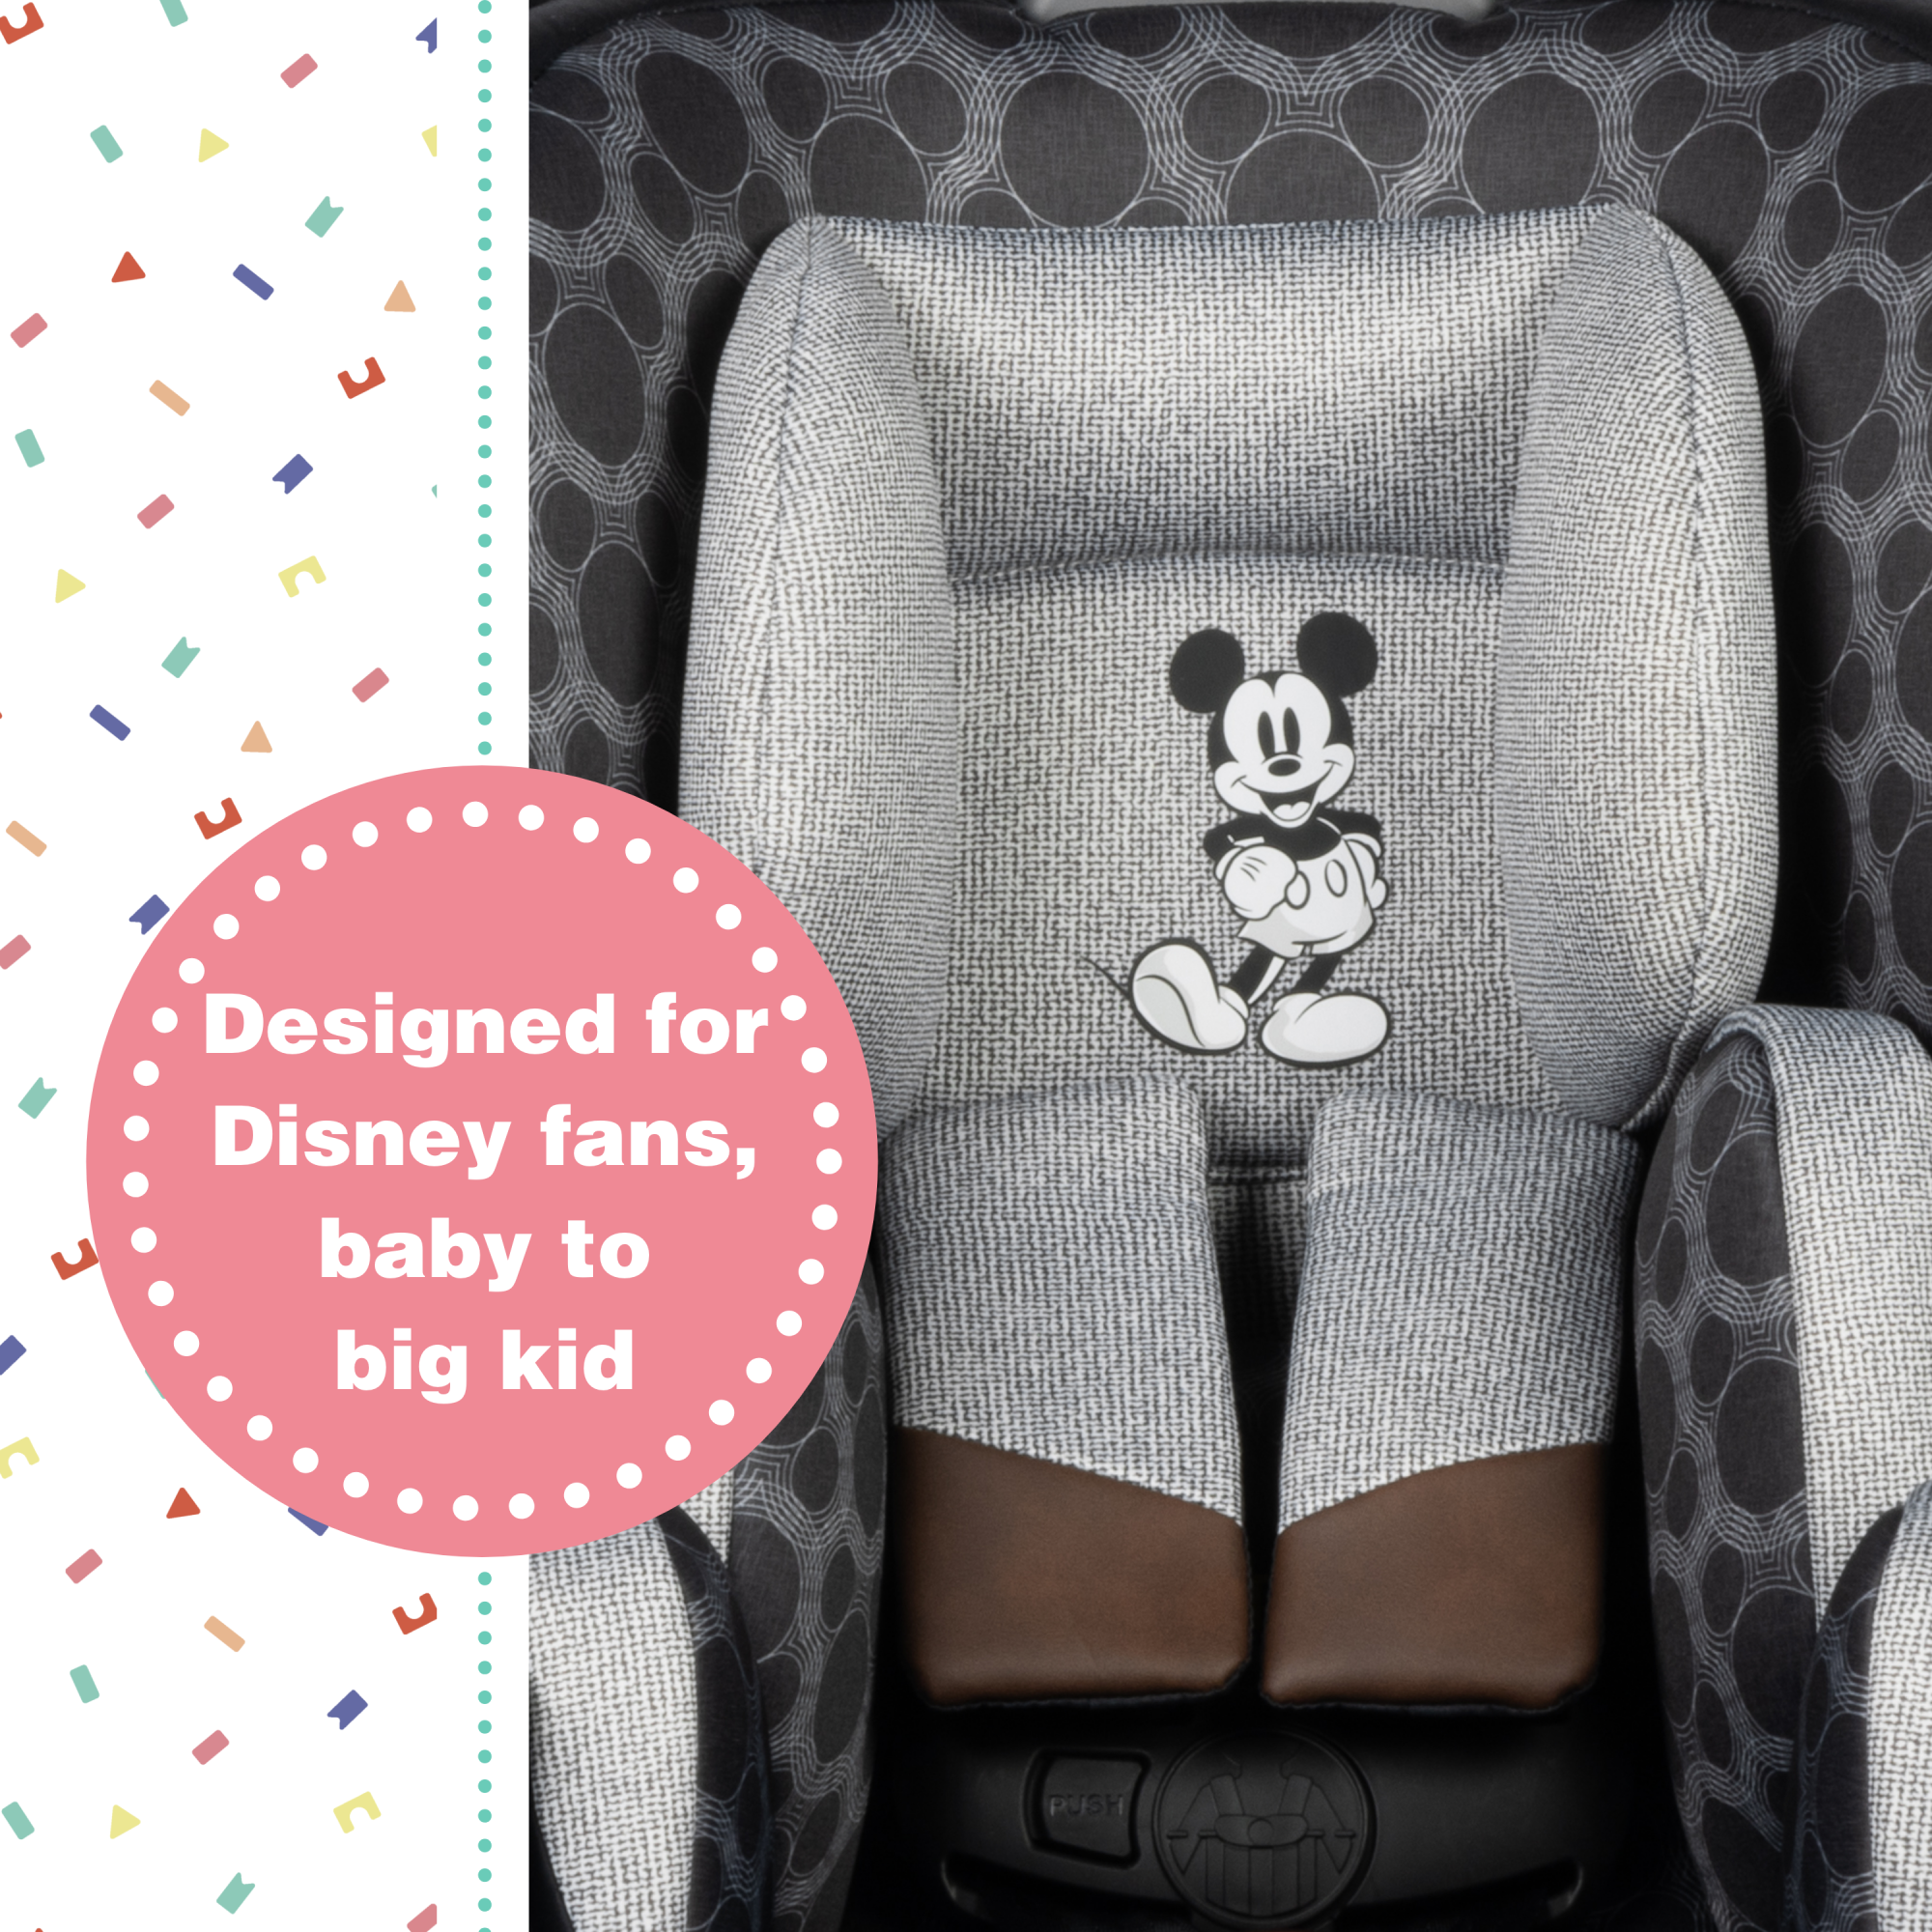 Disney Baby Turn and Go 360 Rotating All-in-One Convertible Car Seat - SafetySwivel 360 provides 360 degree seat rotation, which makes getting kids in and out of the car easier than ever